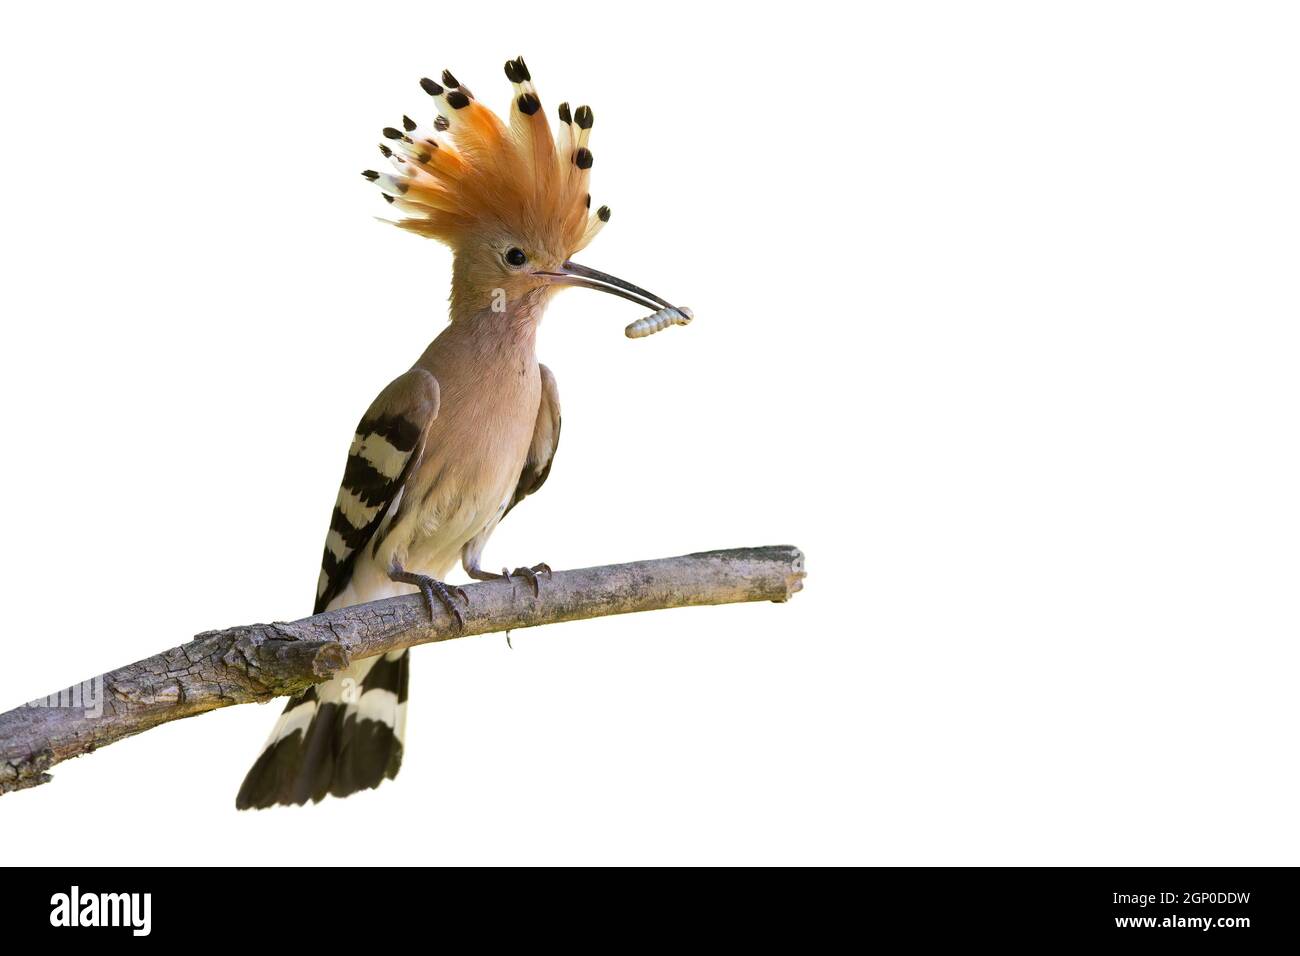 Eurasian hoopoe, upupa epops, sitting on branch cut out on blank. Bird with open crest from feathers holding worm in beak isolated on white background Stock Photo